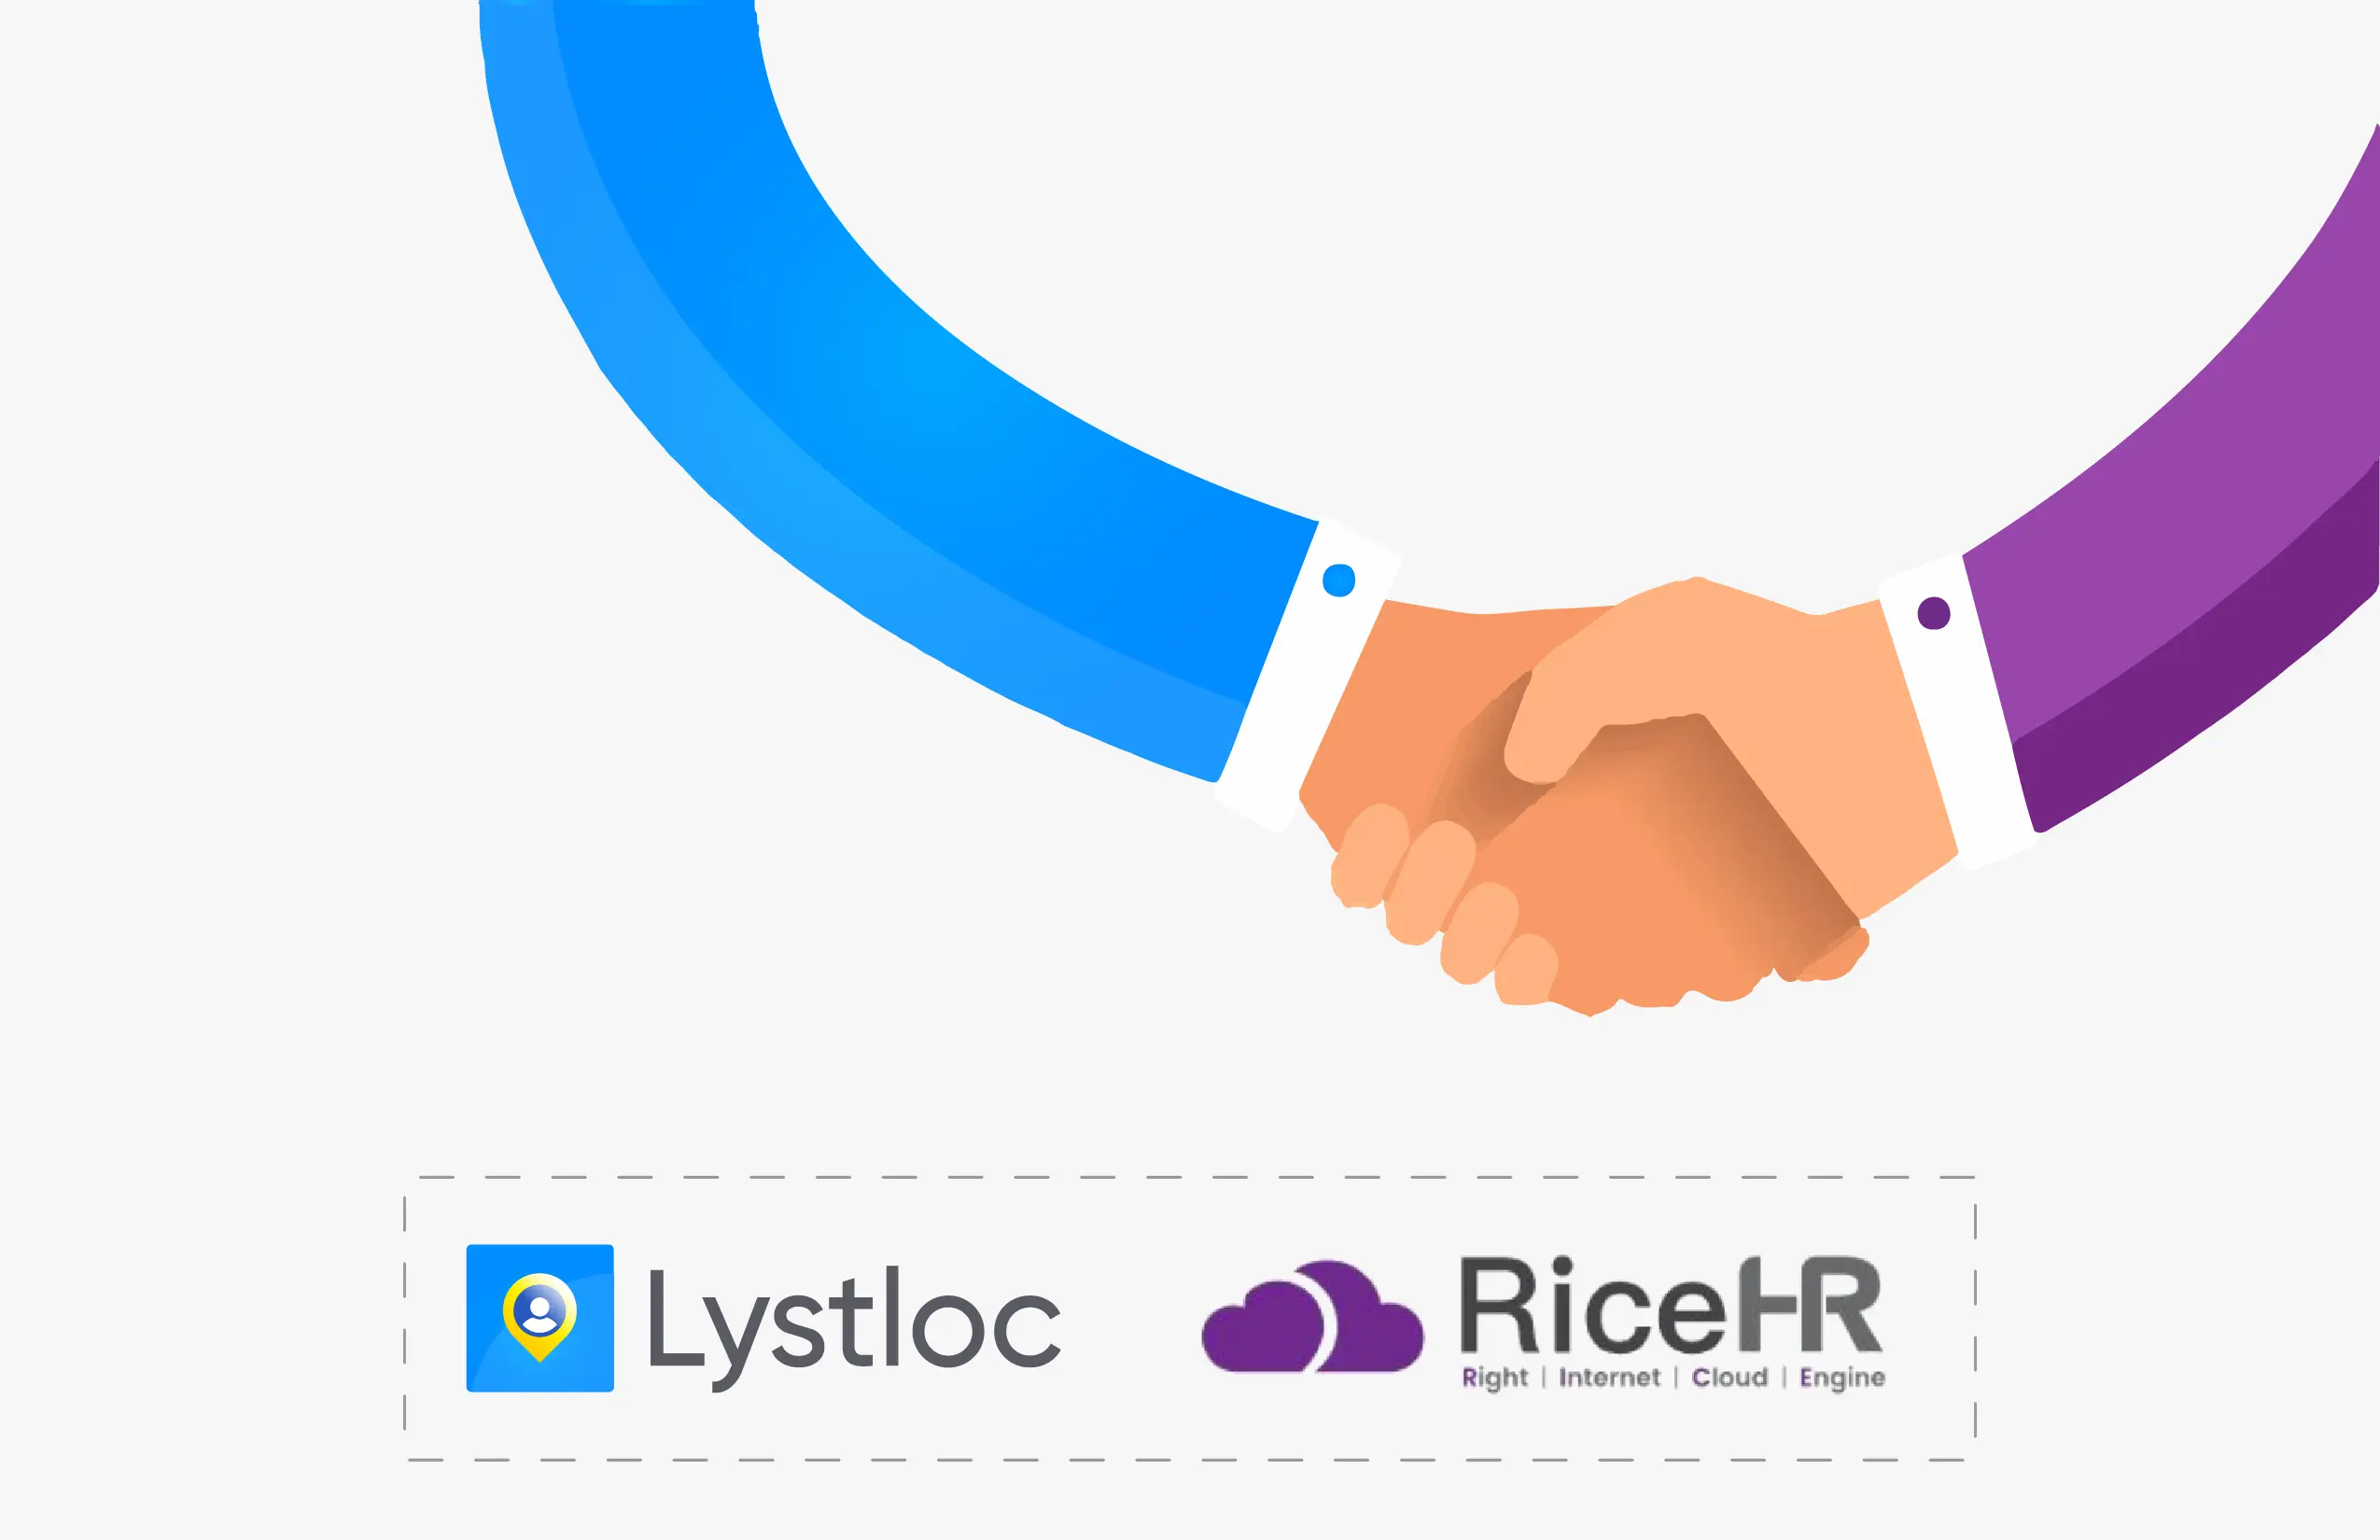 Lystloc – Partnered Up with RiceHR for a Streamlined Payroll Process